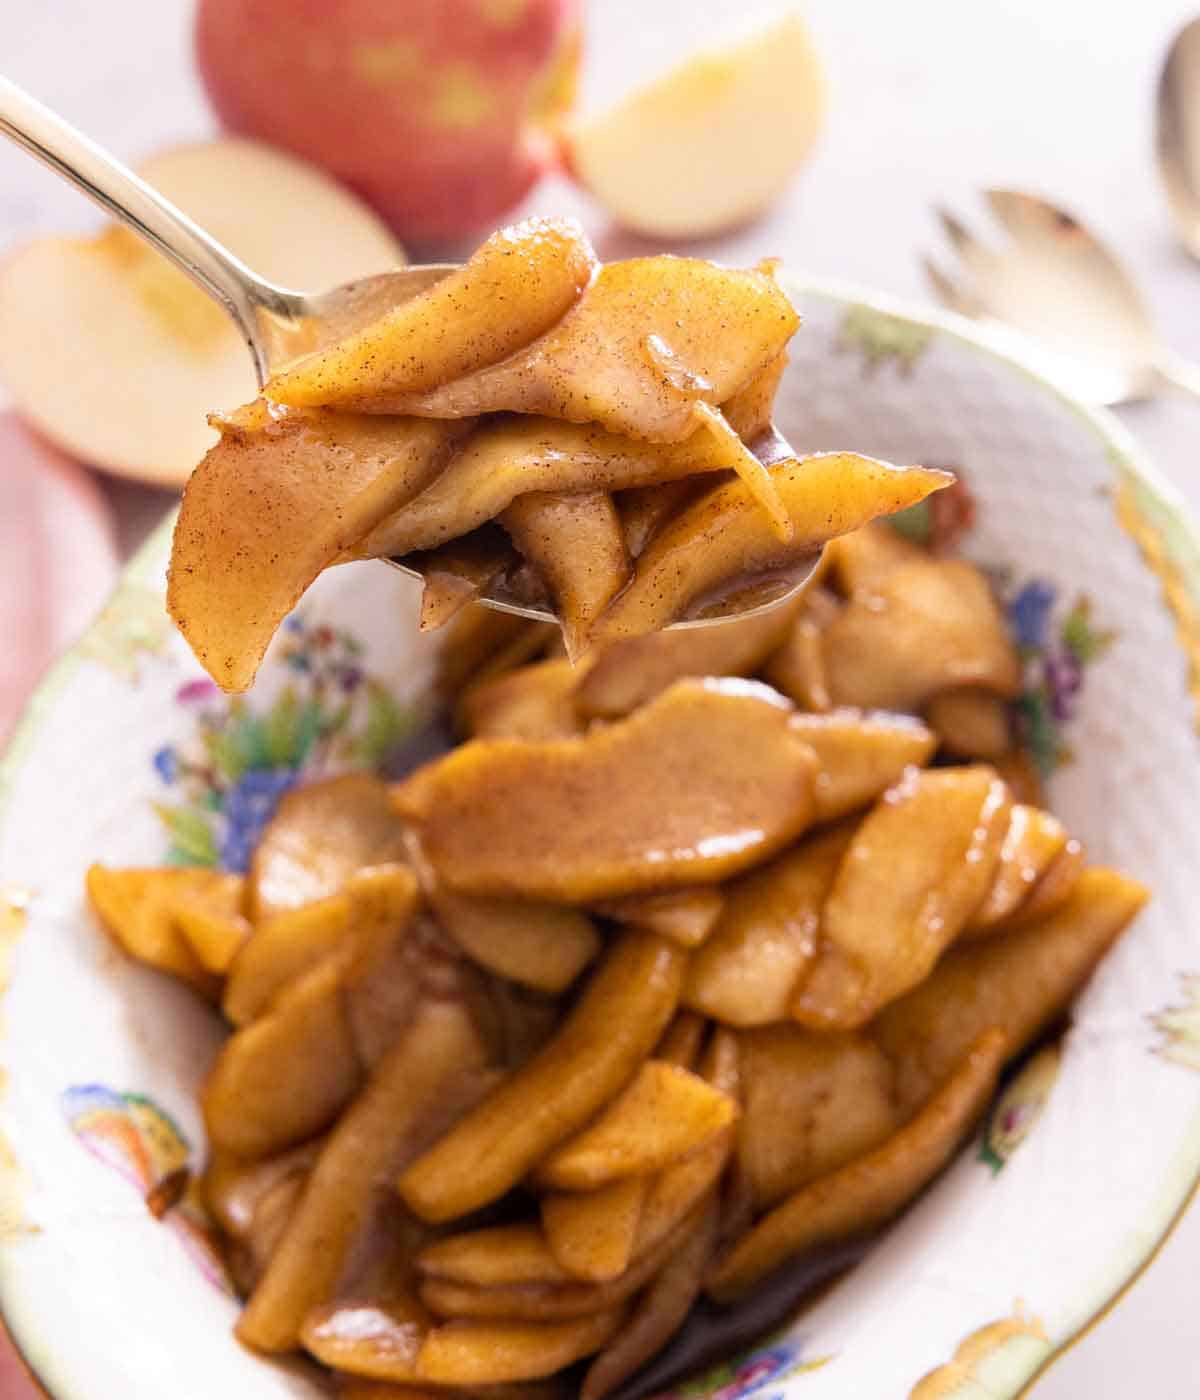 A spoon lifting a spoonful of fried apples from a plate.